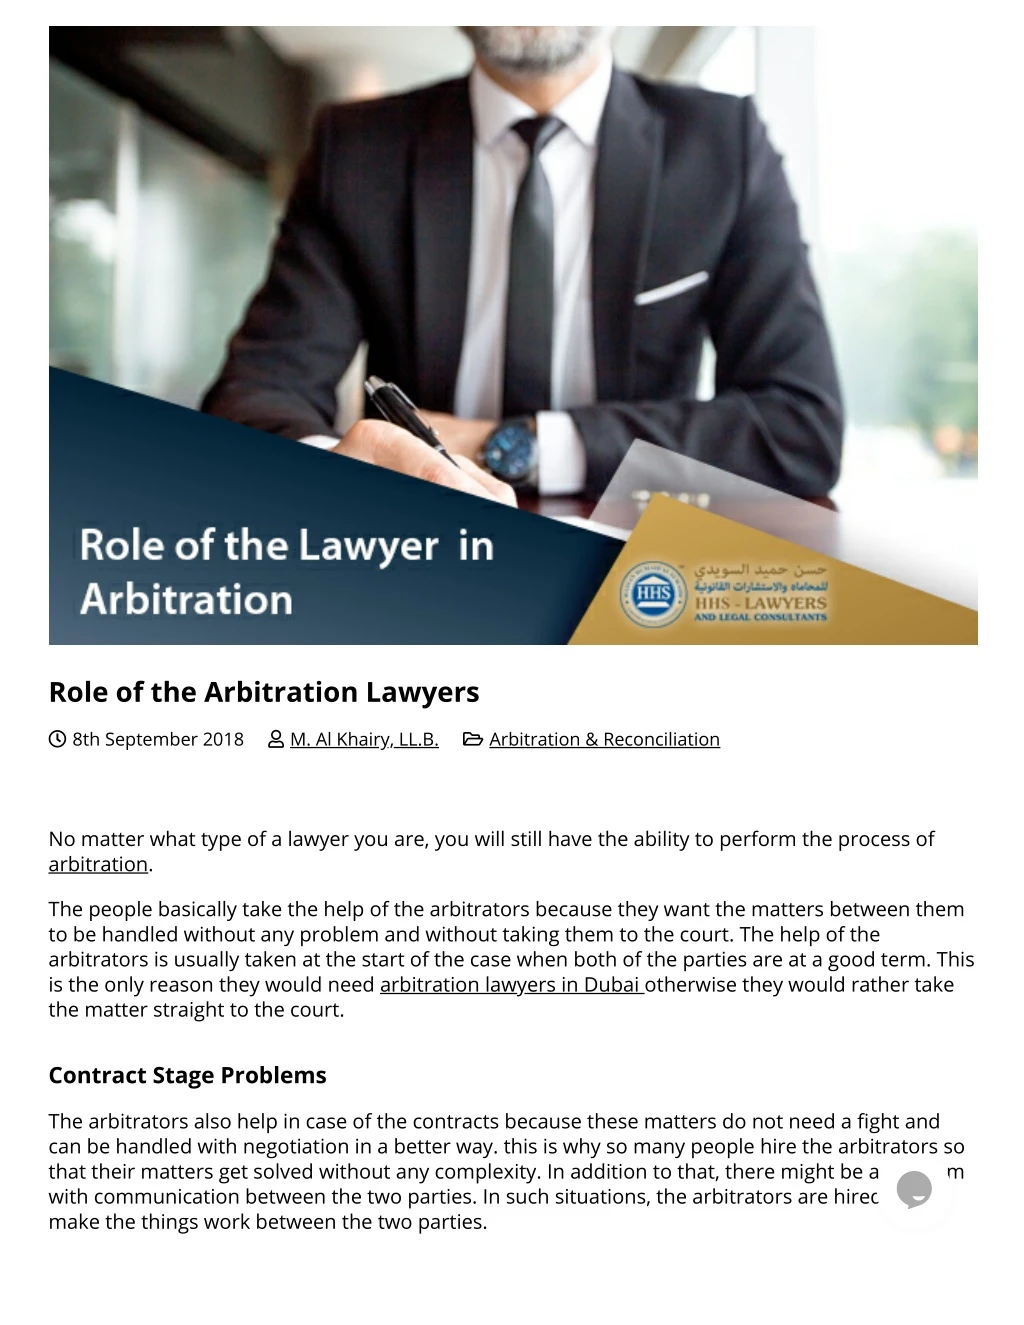 role of the arbitration lawyers